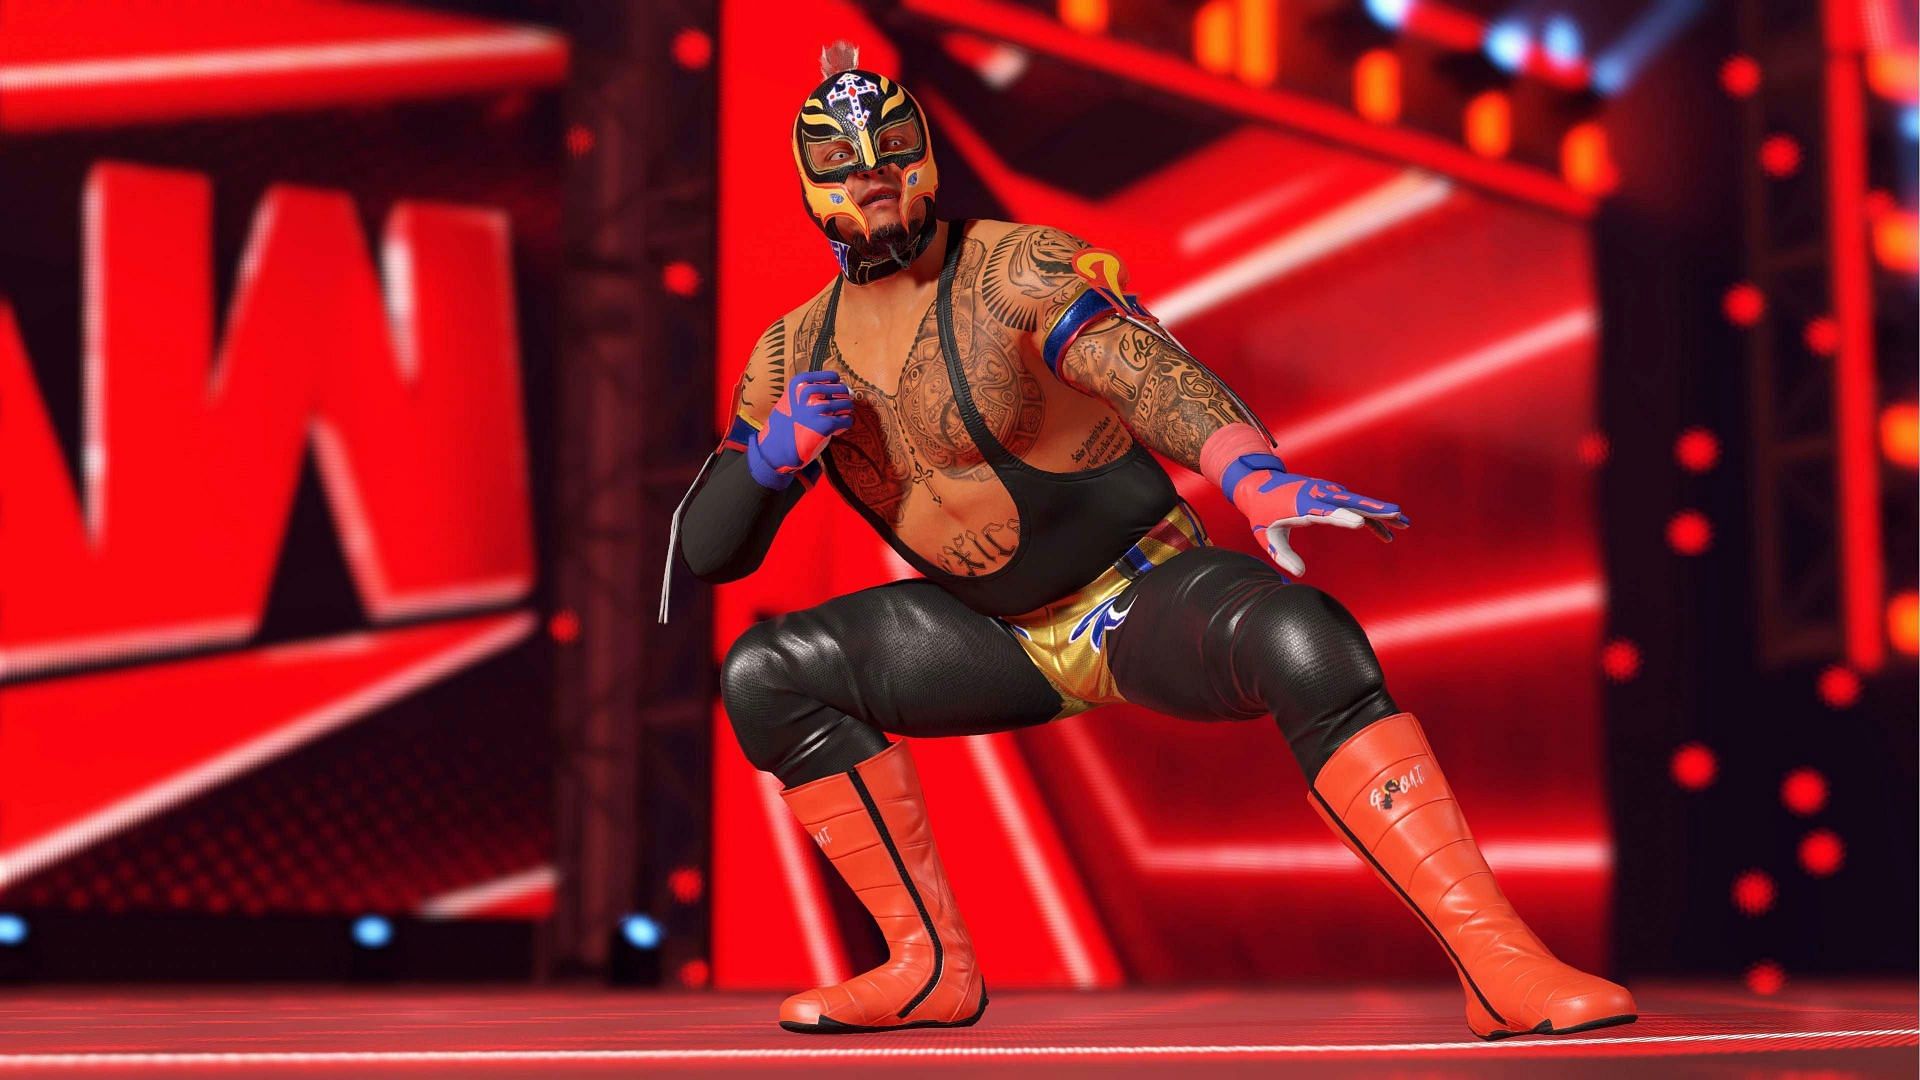 Potential release date window for WWE 2K23 revealed